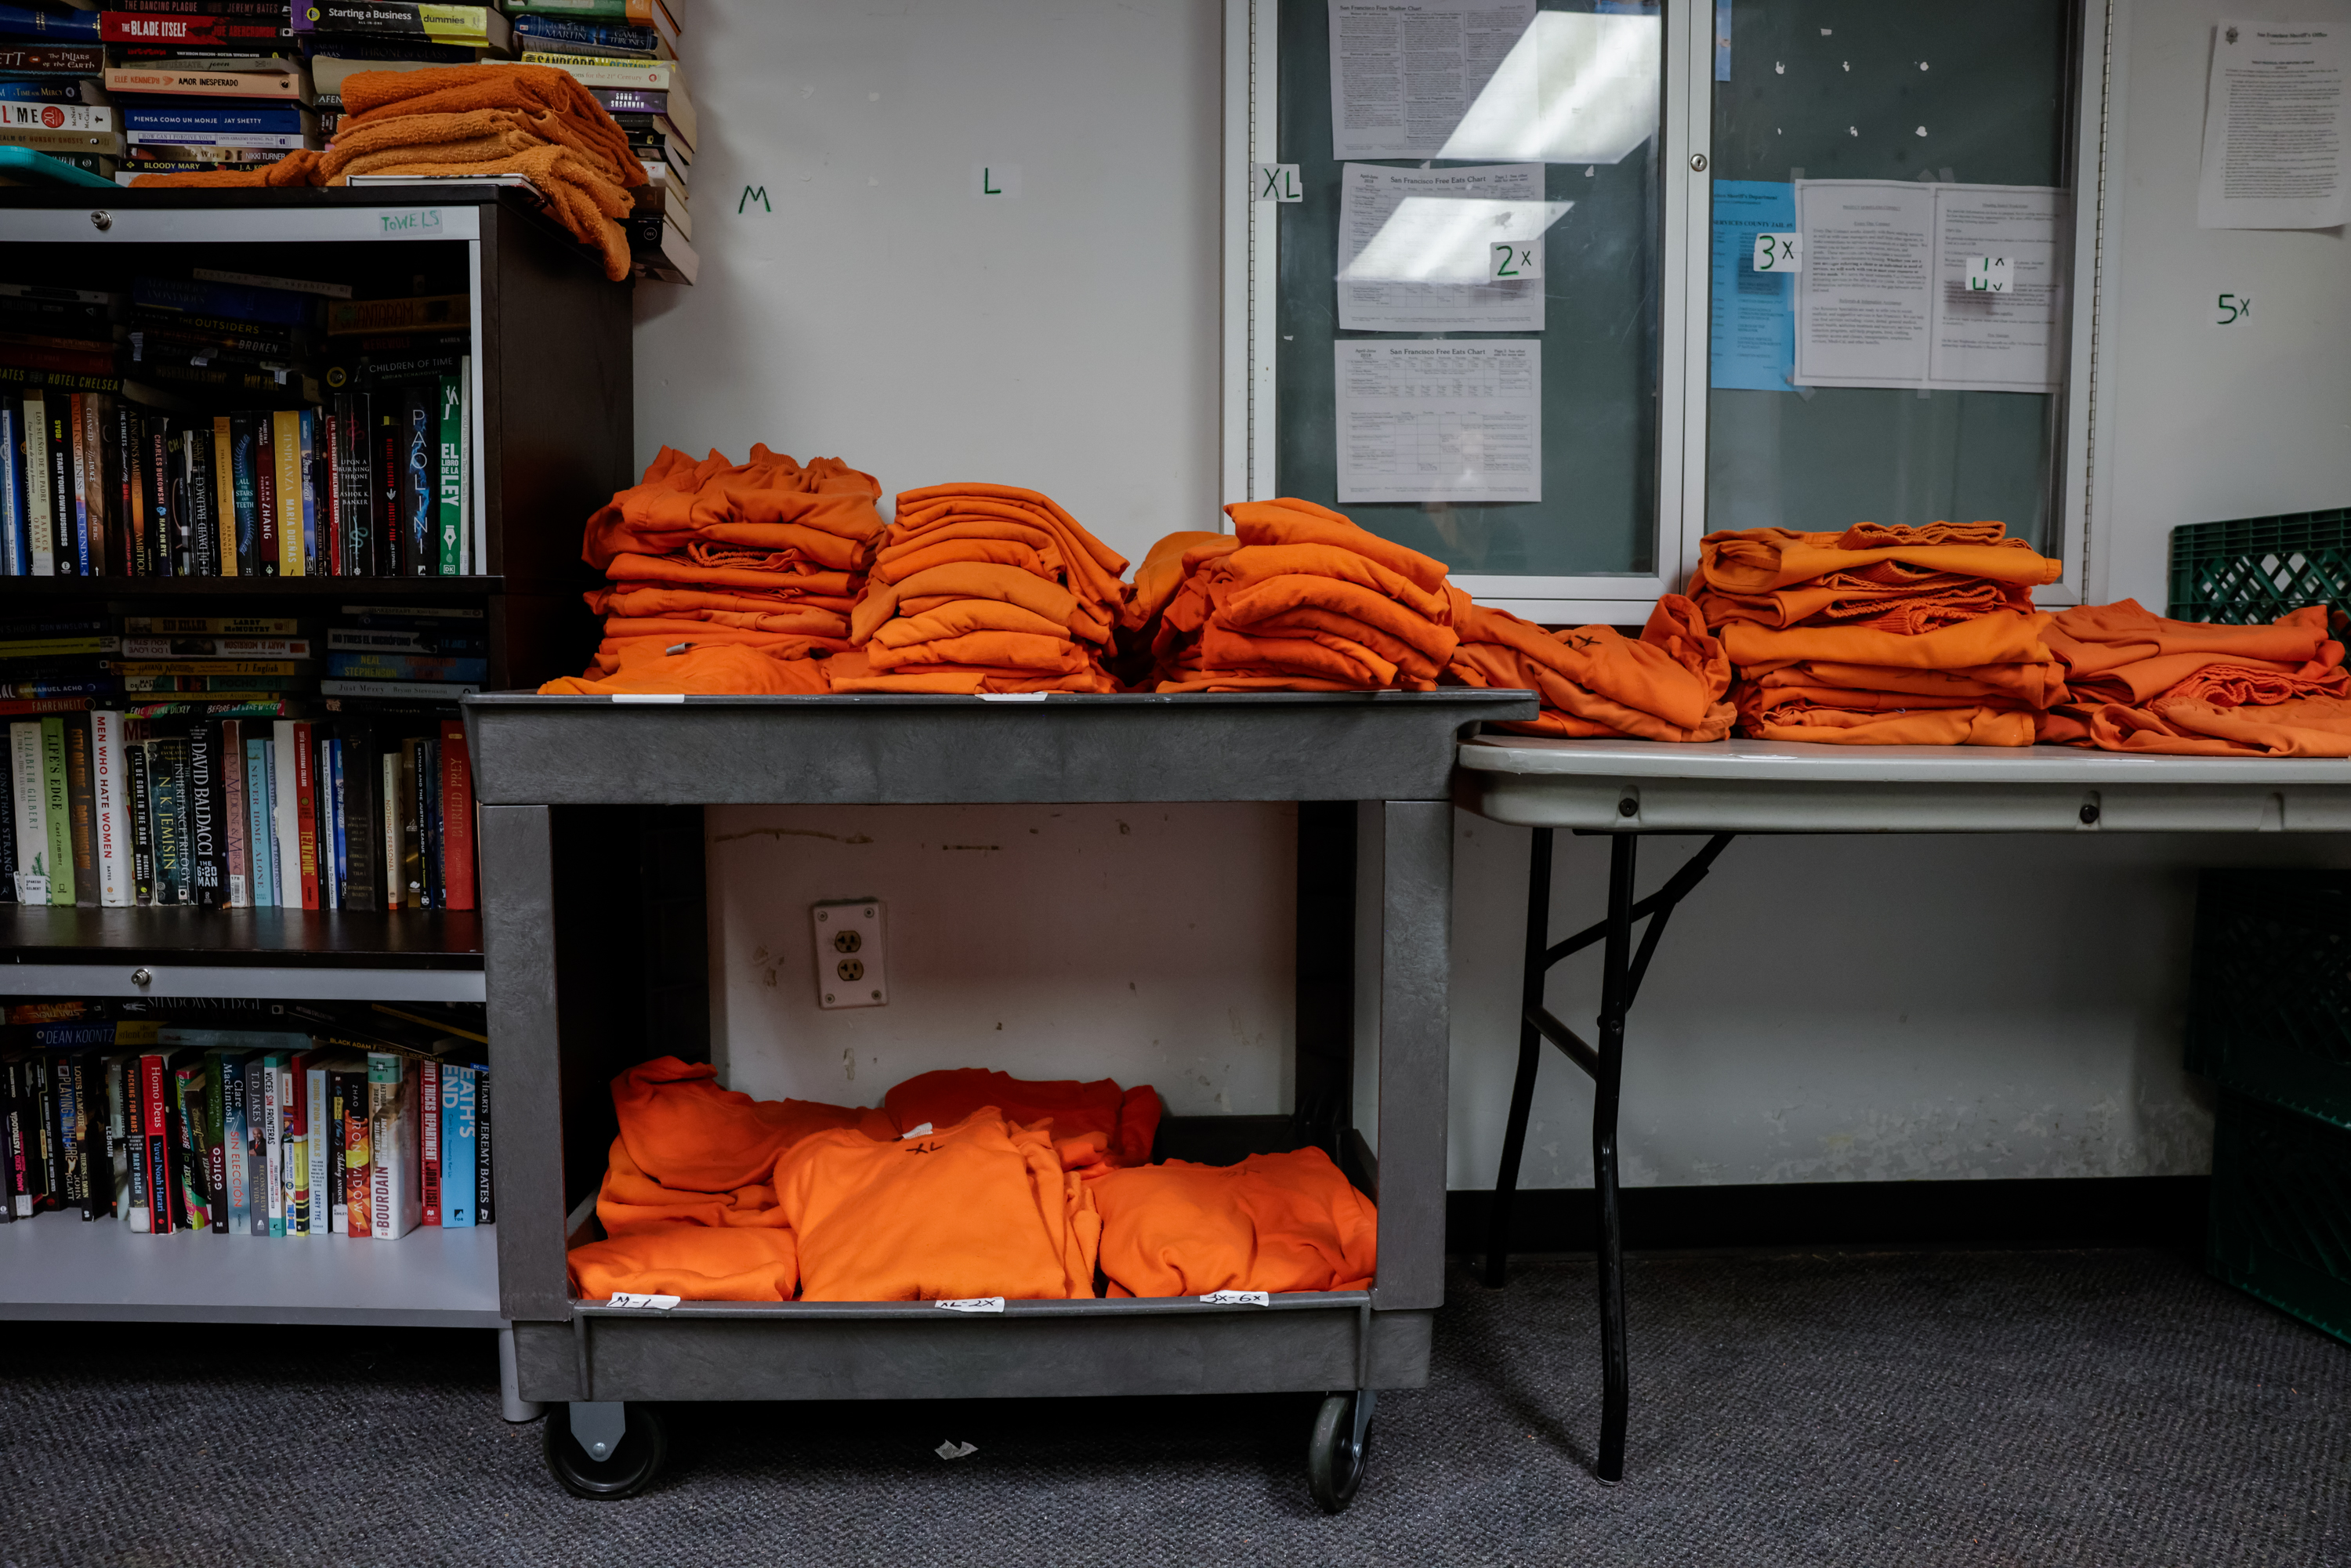 A stack of orange prison clothes sit atop a cart and folding table next to a bookshelf inside the jail.